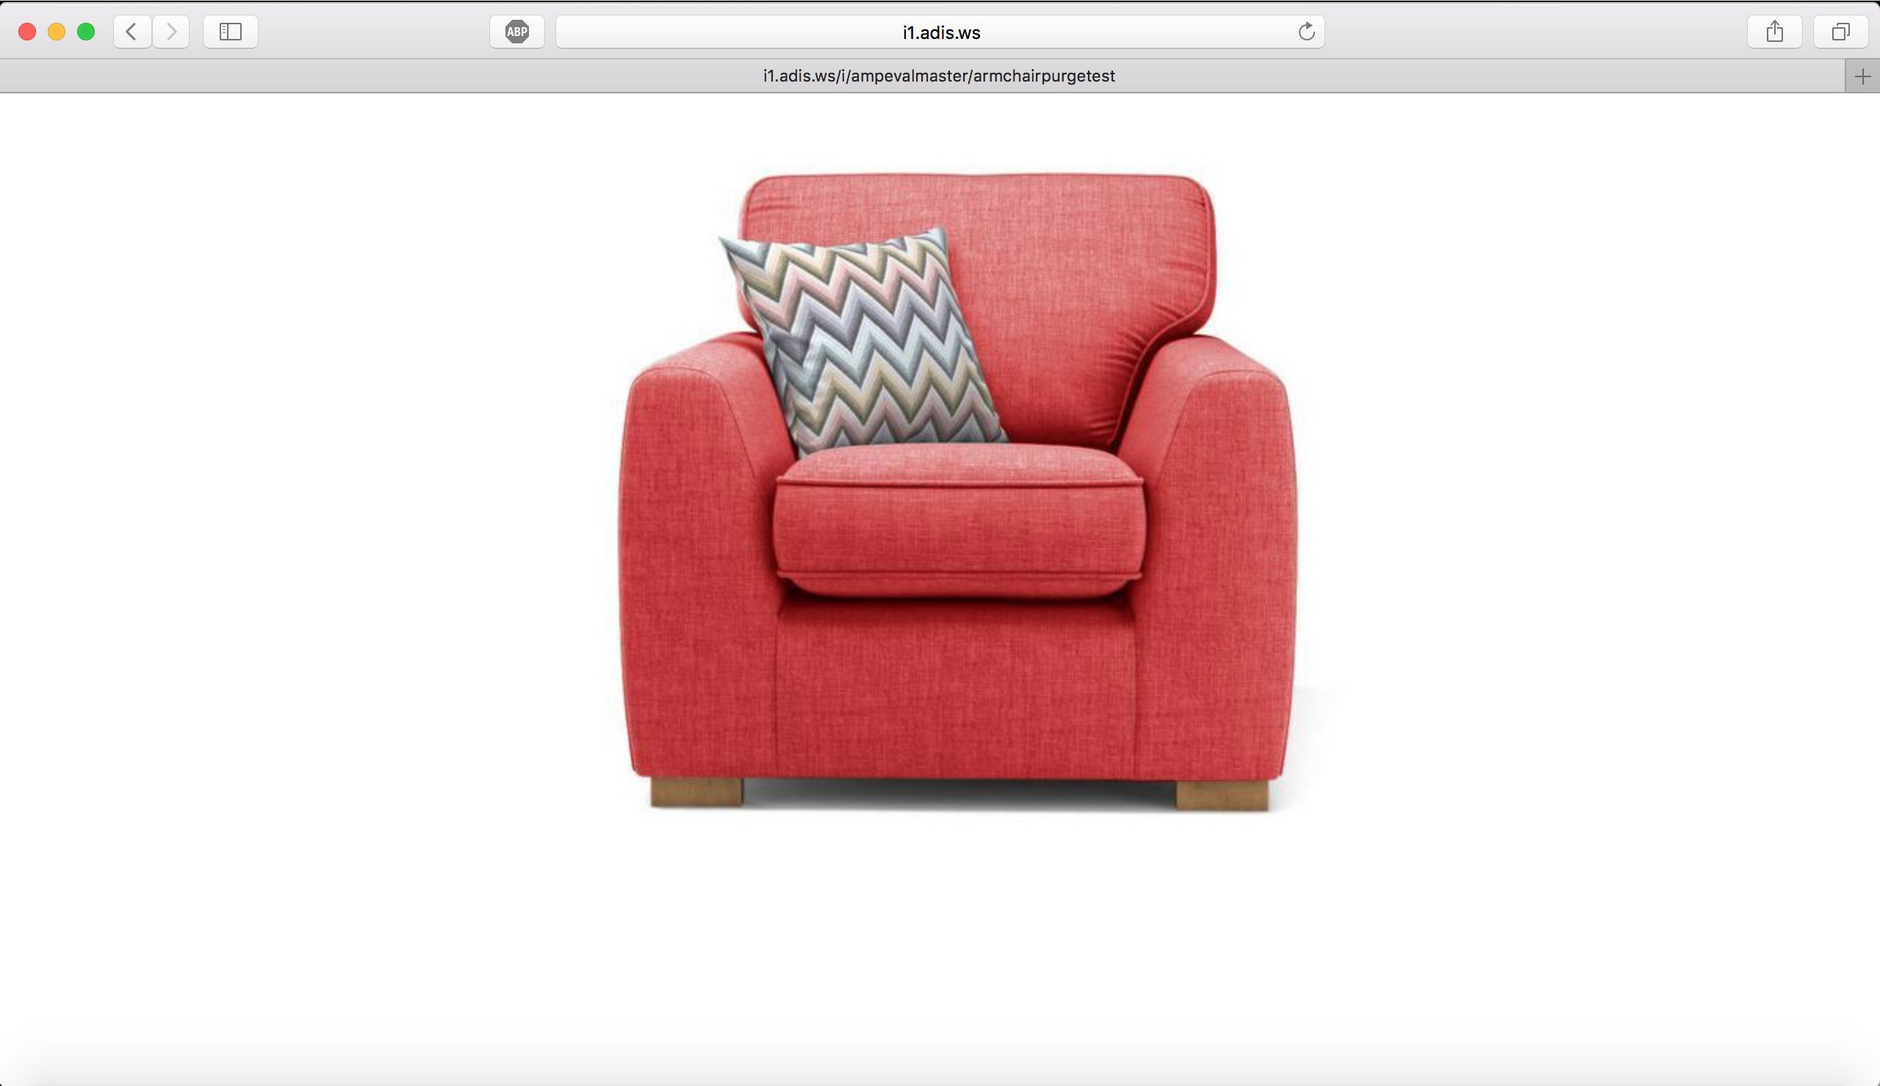 The previous armchair image is still cached, so the red armchair will be retrieved when we load the image URL in the browser.